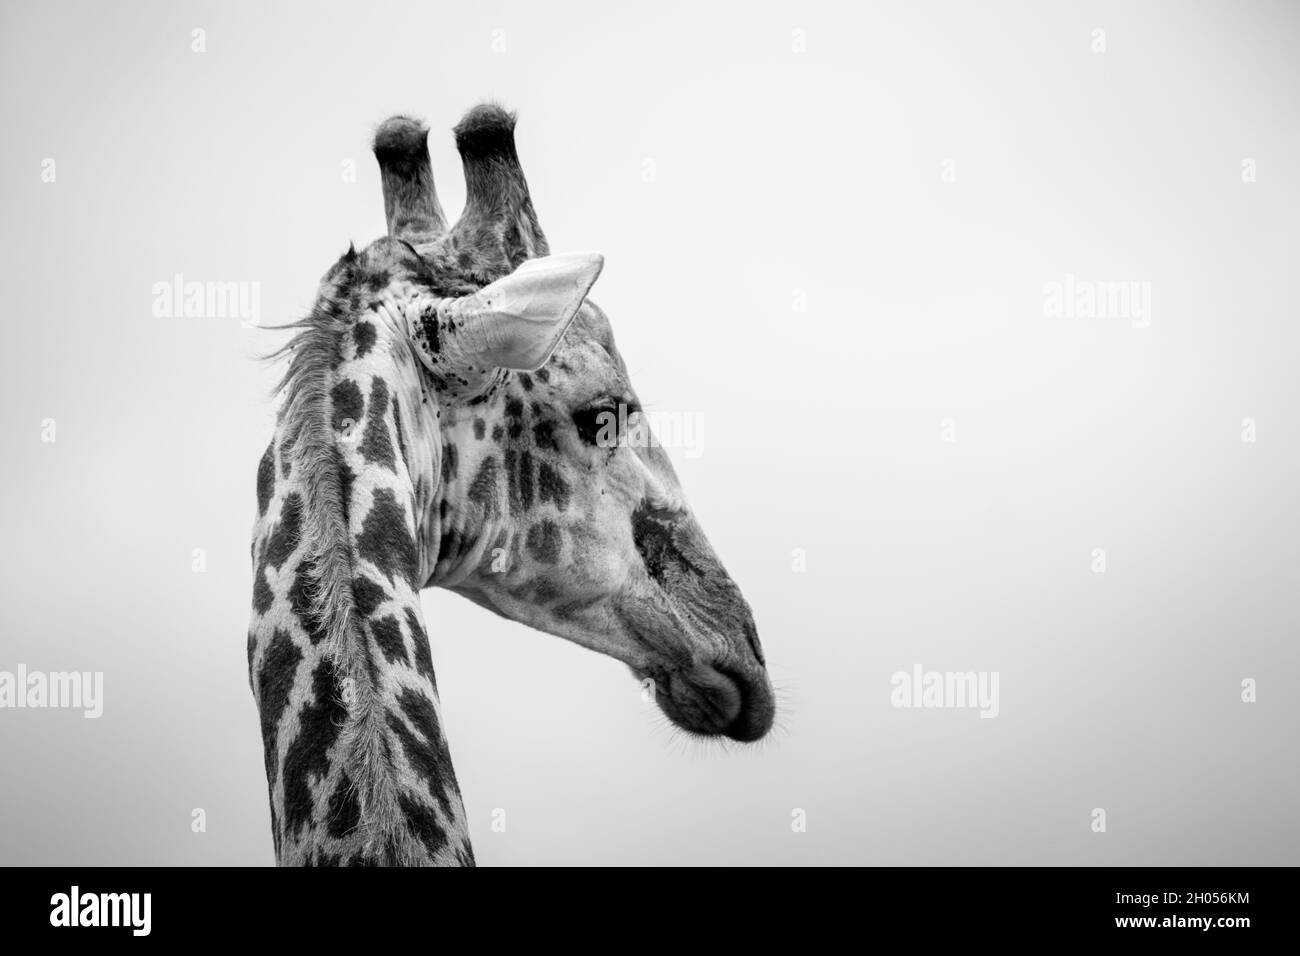 A black and white image of an African giraffe. Taken in the Kruger National Park, South Africa. Stock Photo